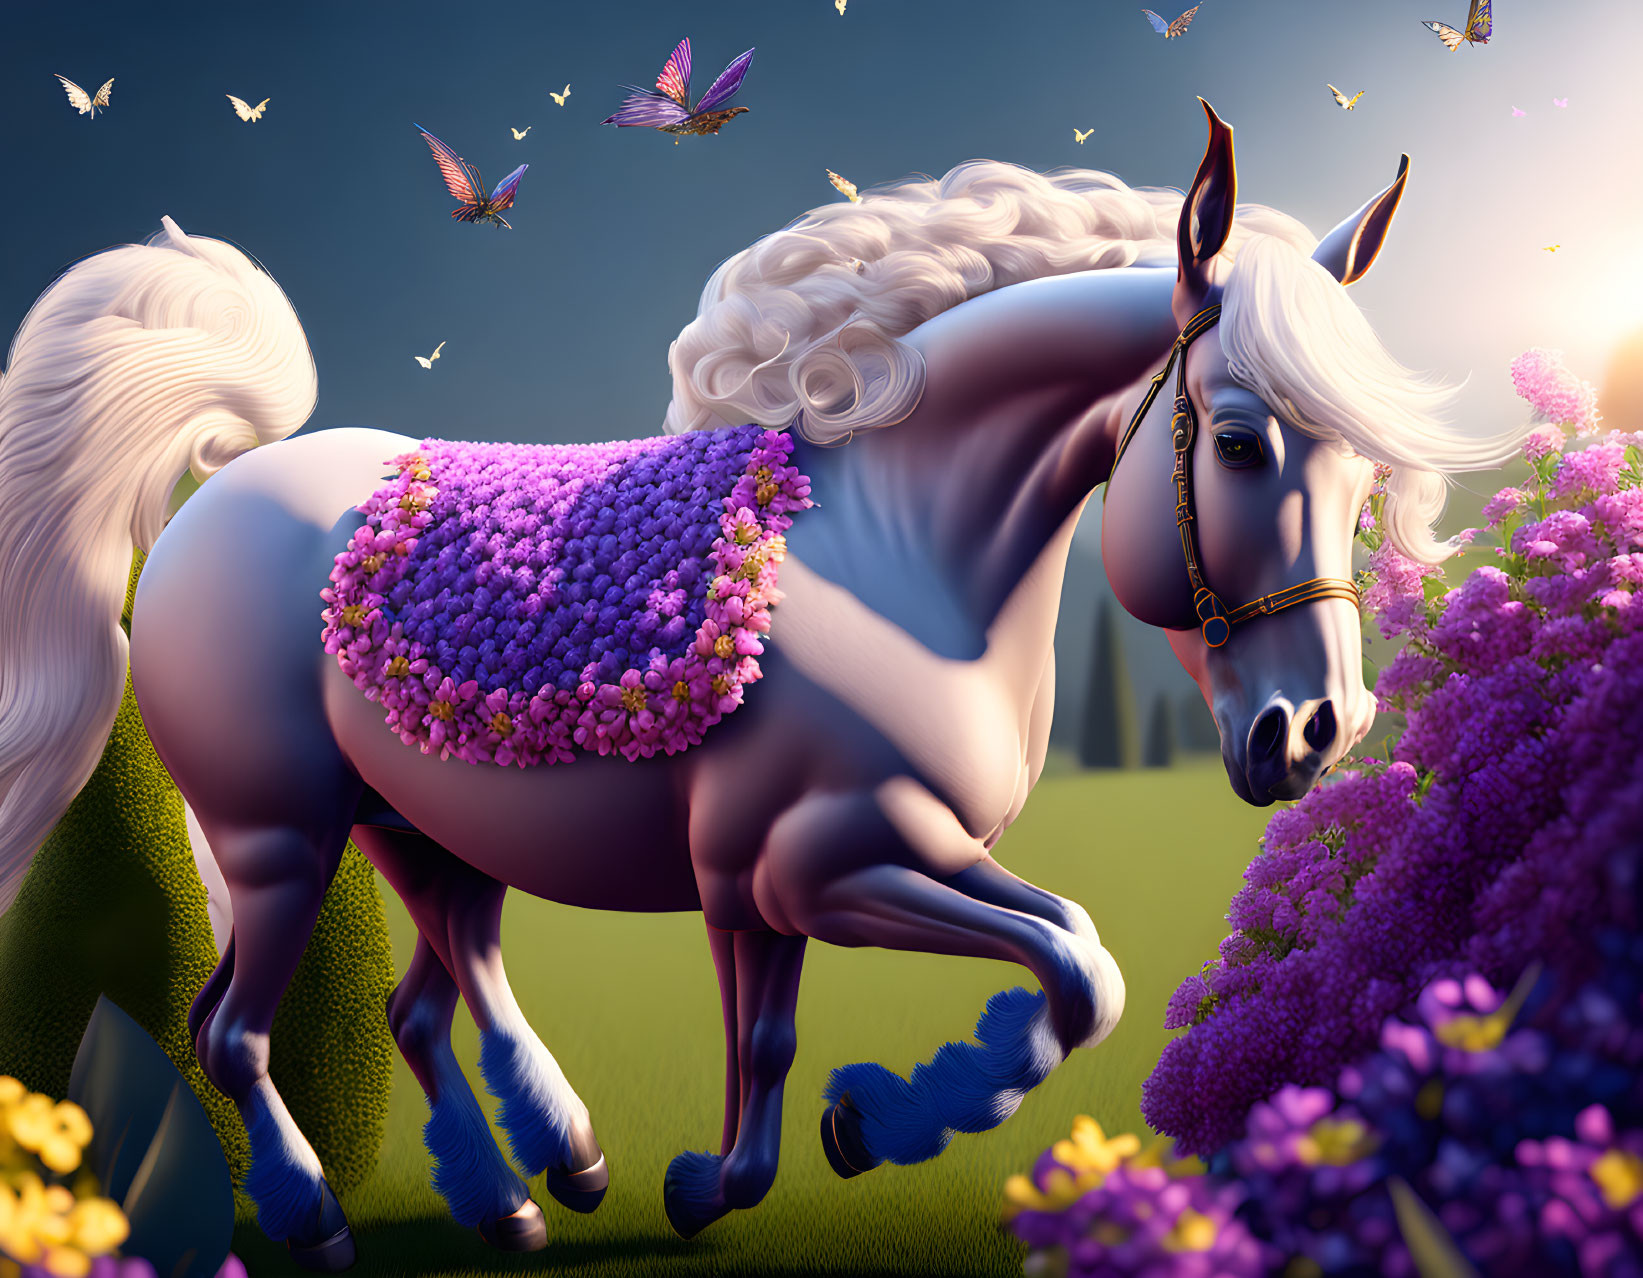 White horse with purple flowers near lavender and butterflies